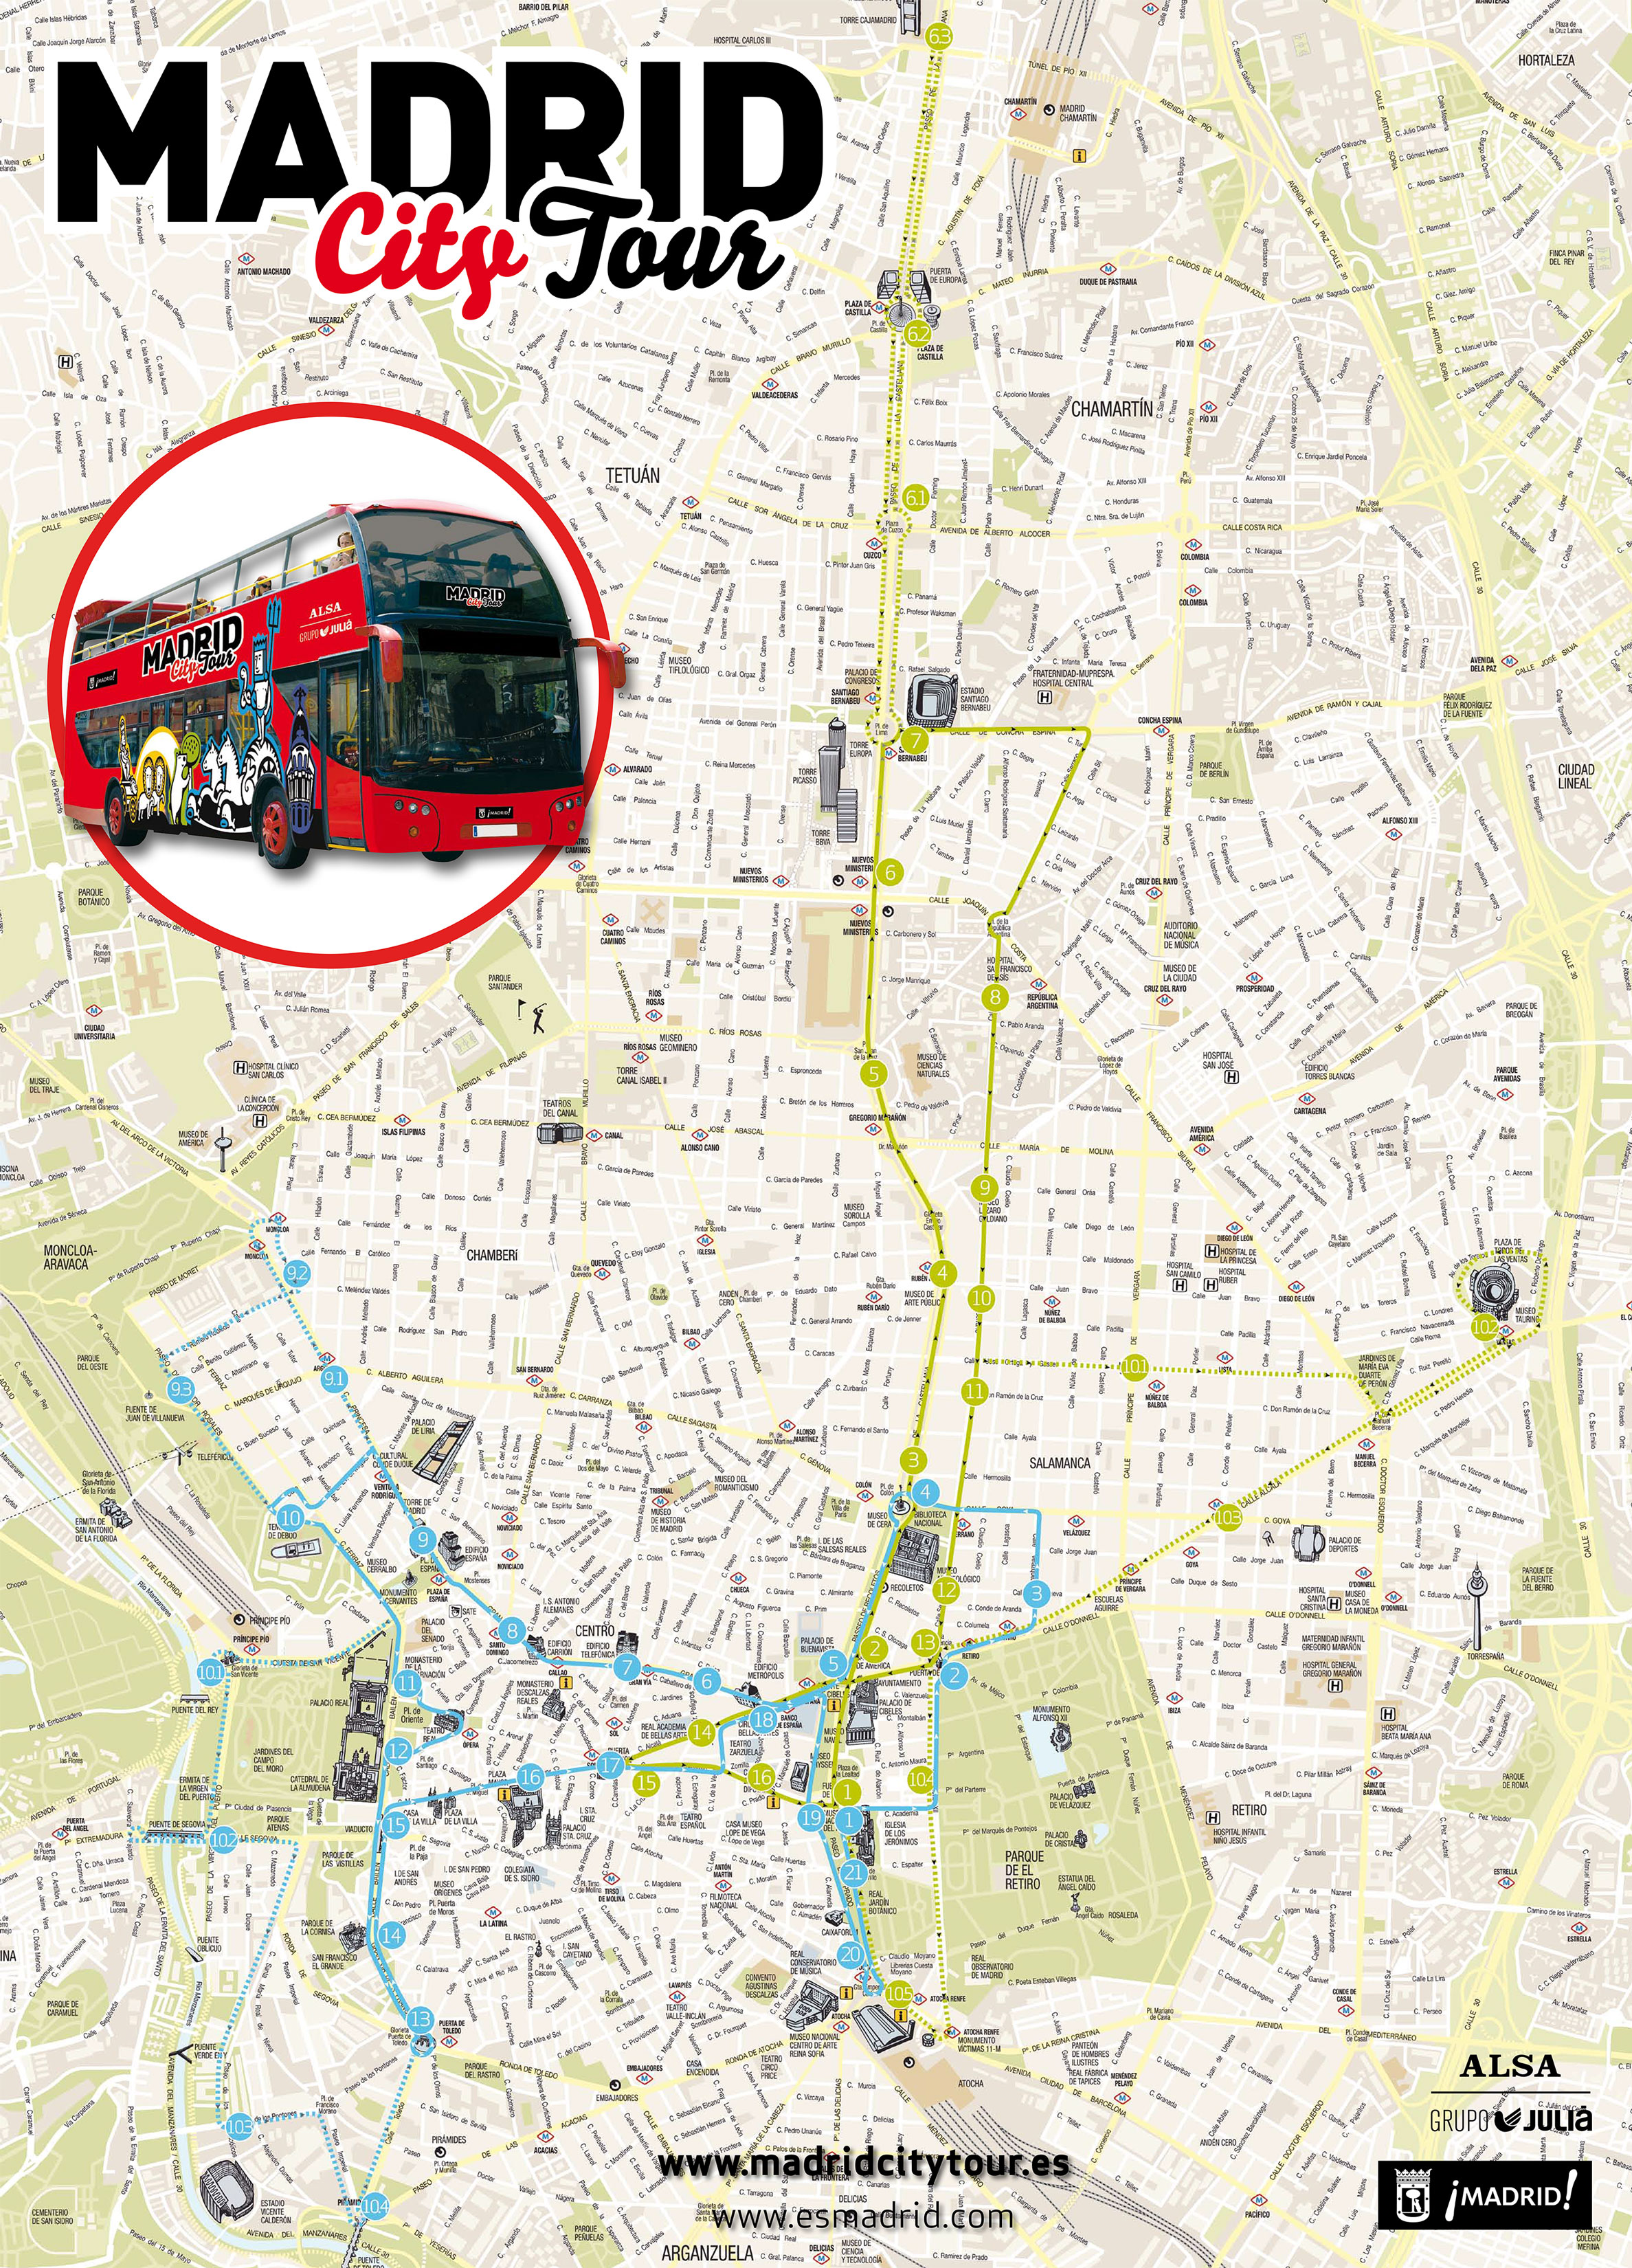 Madrid City Tour Bus Map Map of Madrid tourist attractions, sightseeing & tourist tour